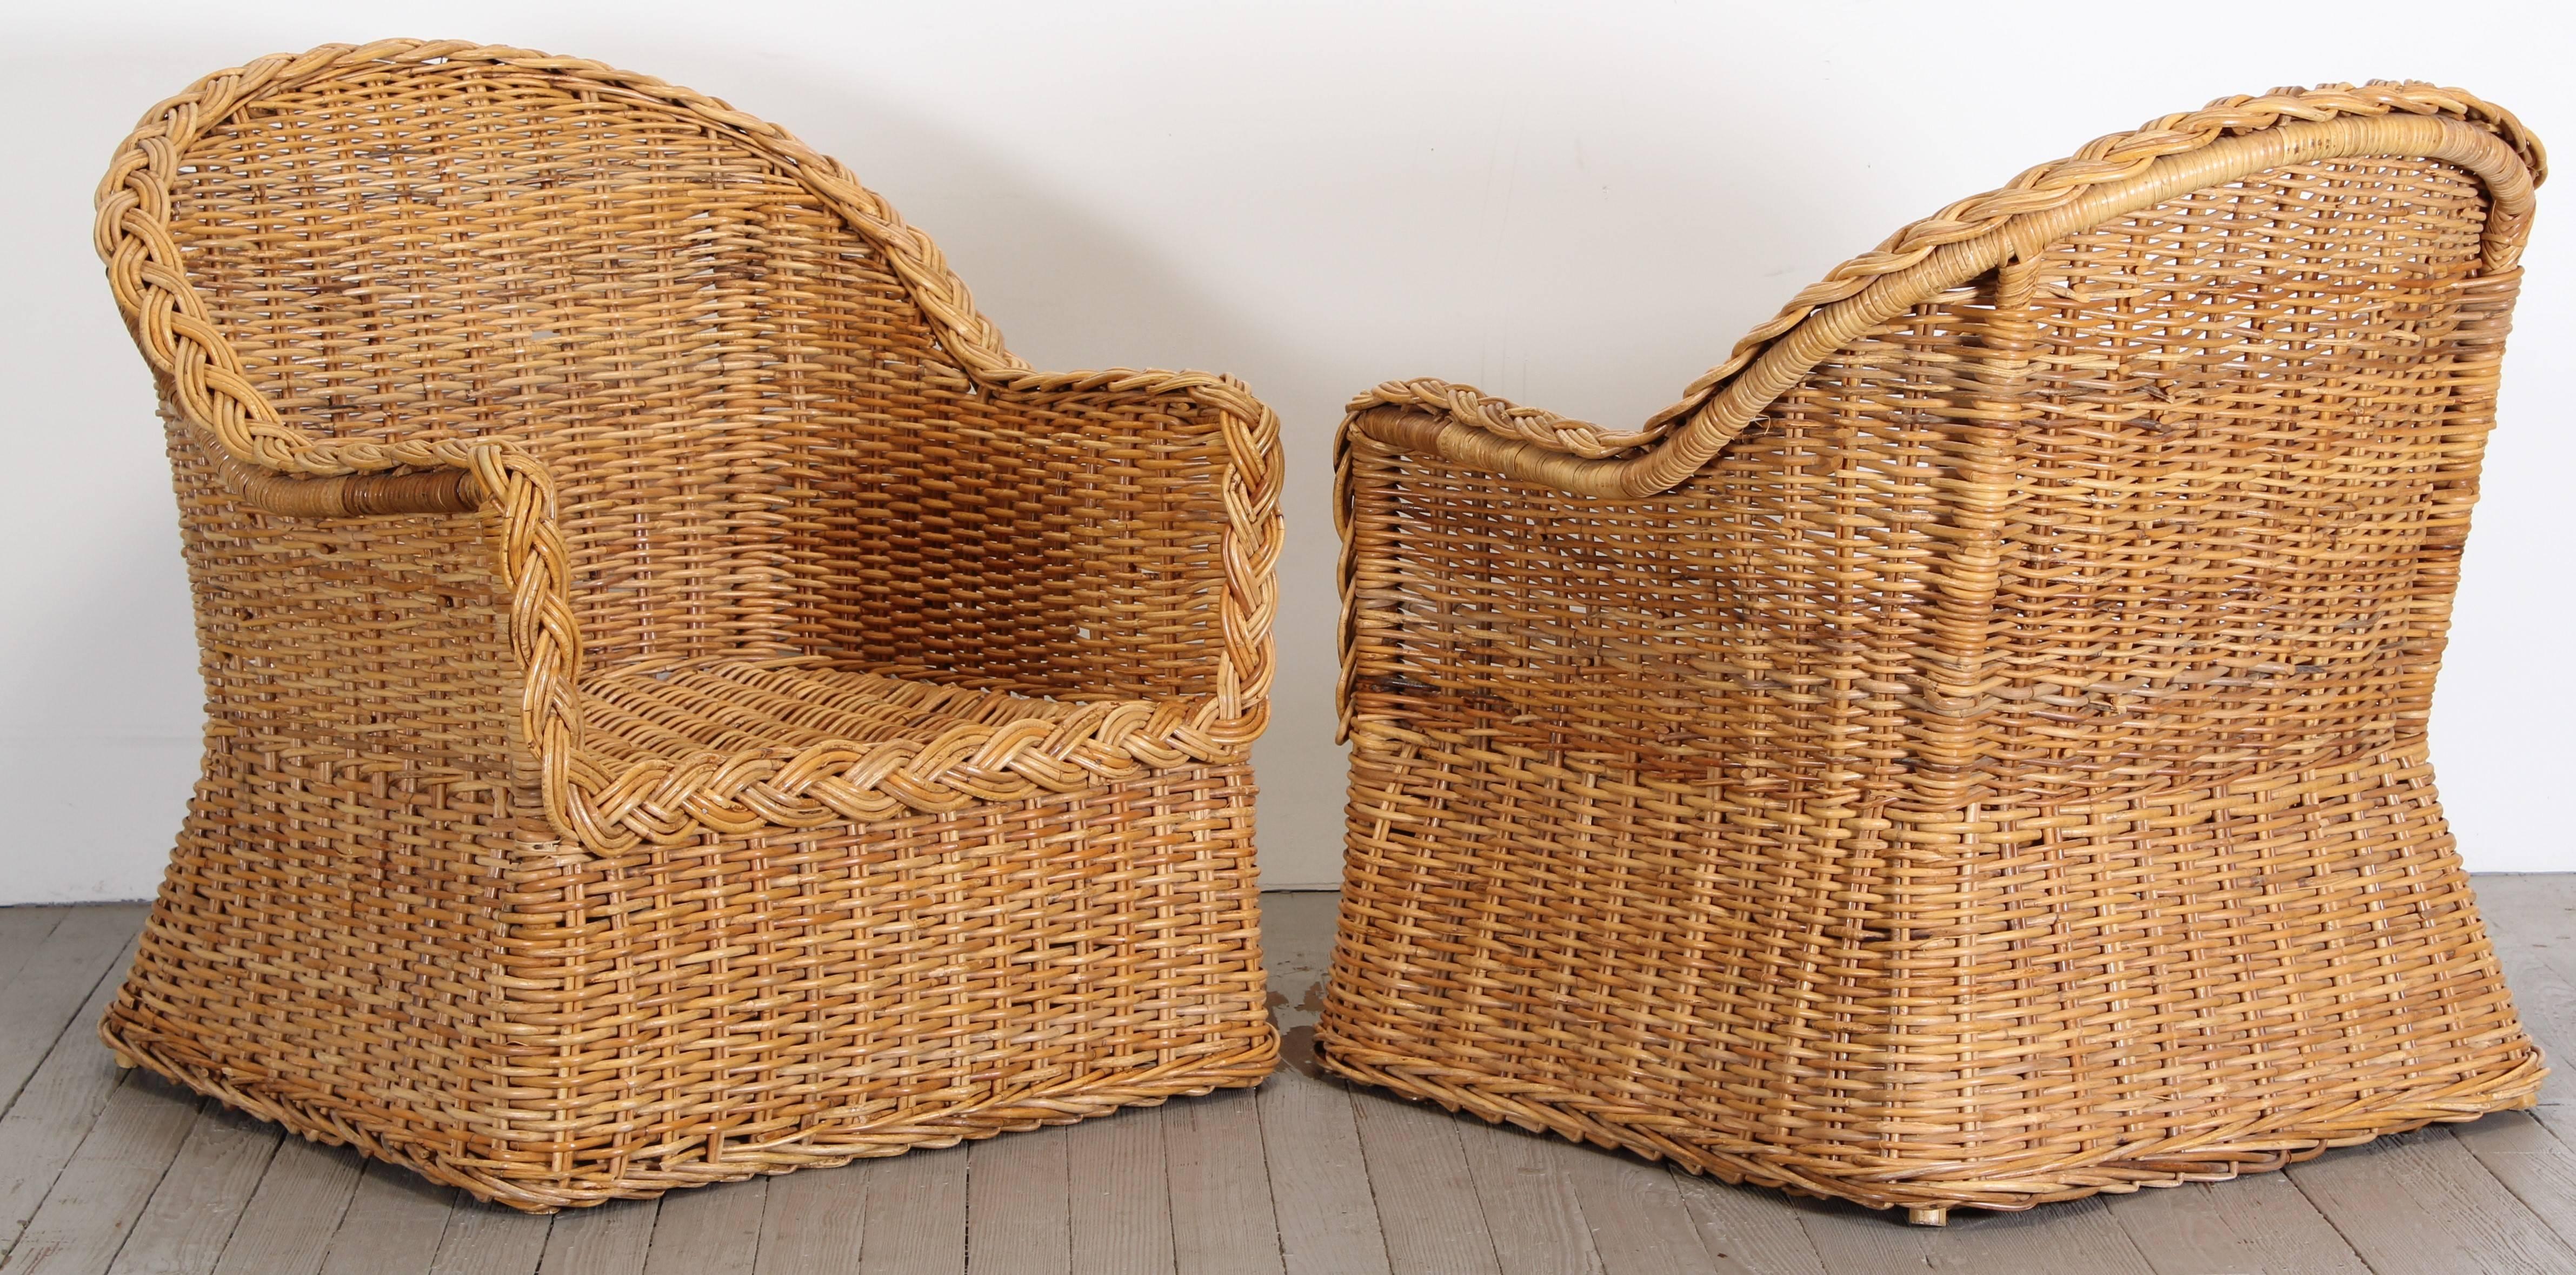 A fabulous pair of wicker armchairs, circa 1960. The solid foam cushions are included for both chairs, however they need to be reupholstered. These will look great in an enclosed patio, sun room or any modern or traditional home.